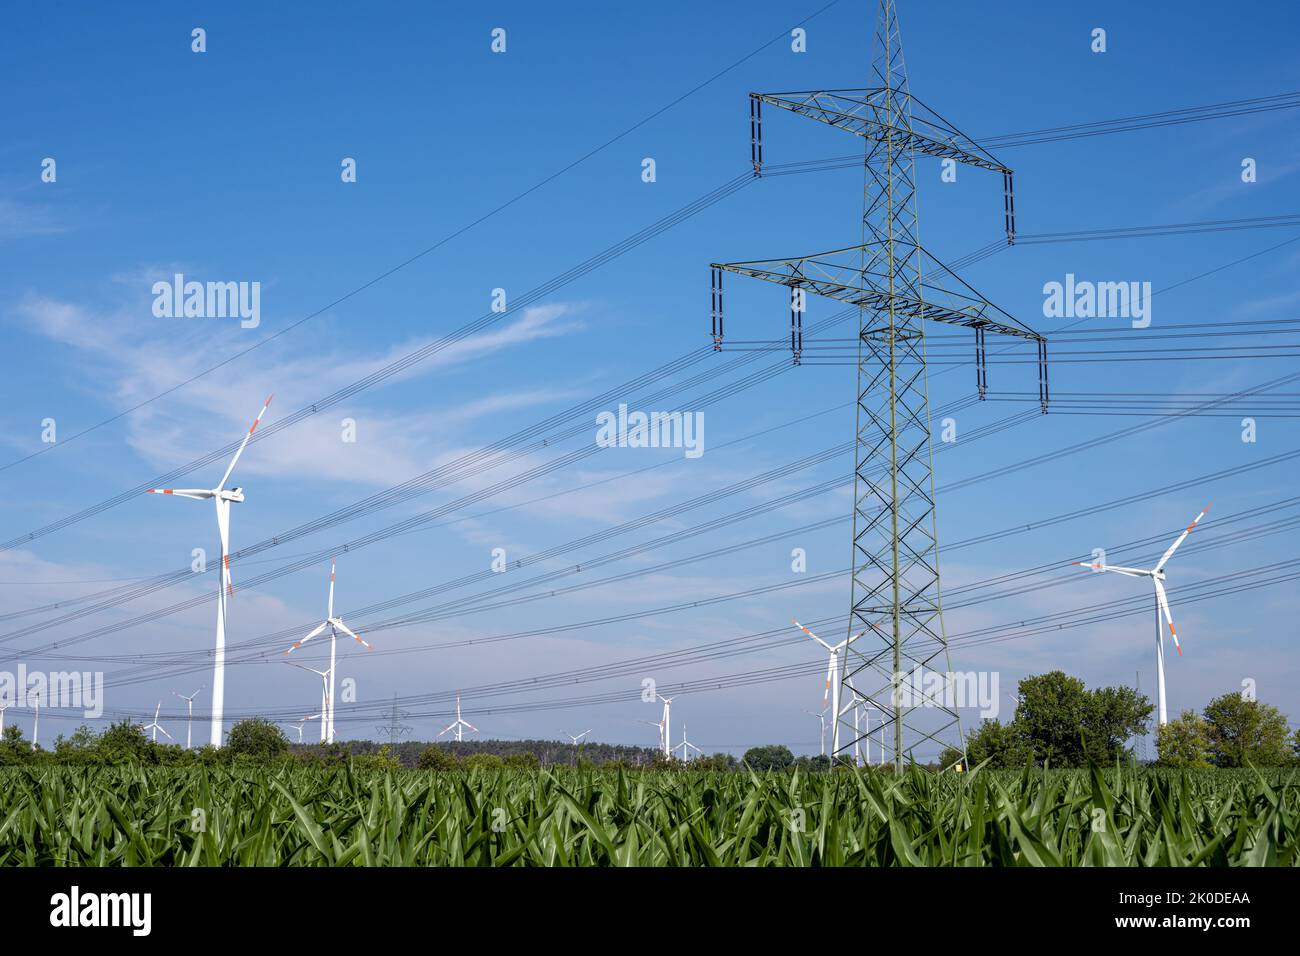 Electricity pylons, power lines and wind turbines seen in Germany Stock Photo